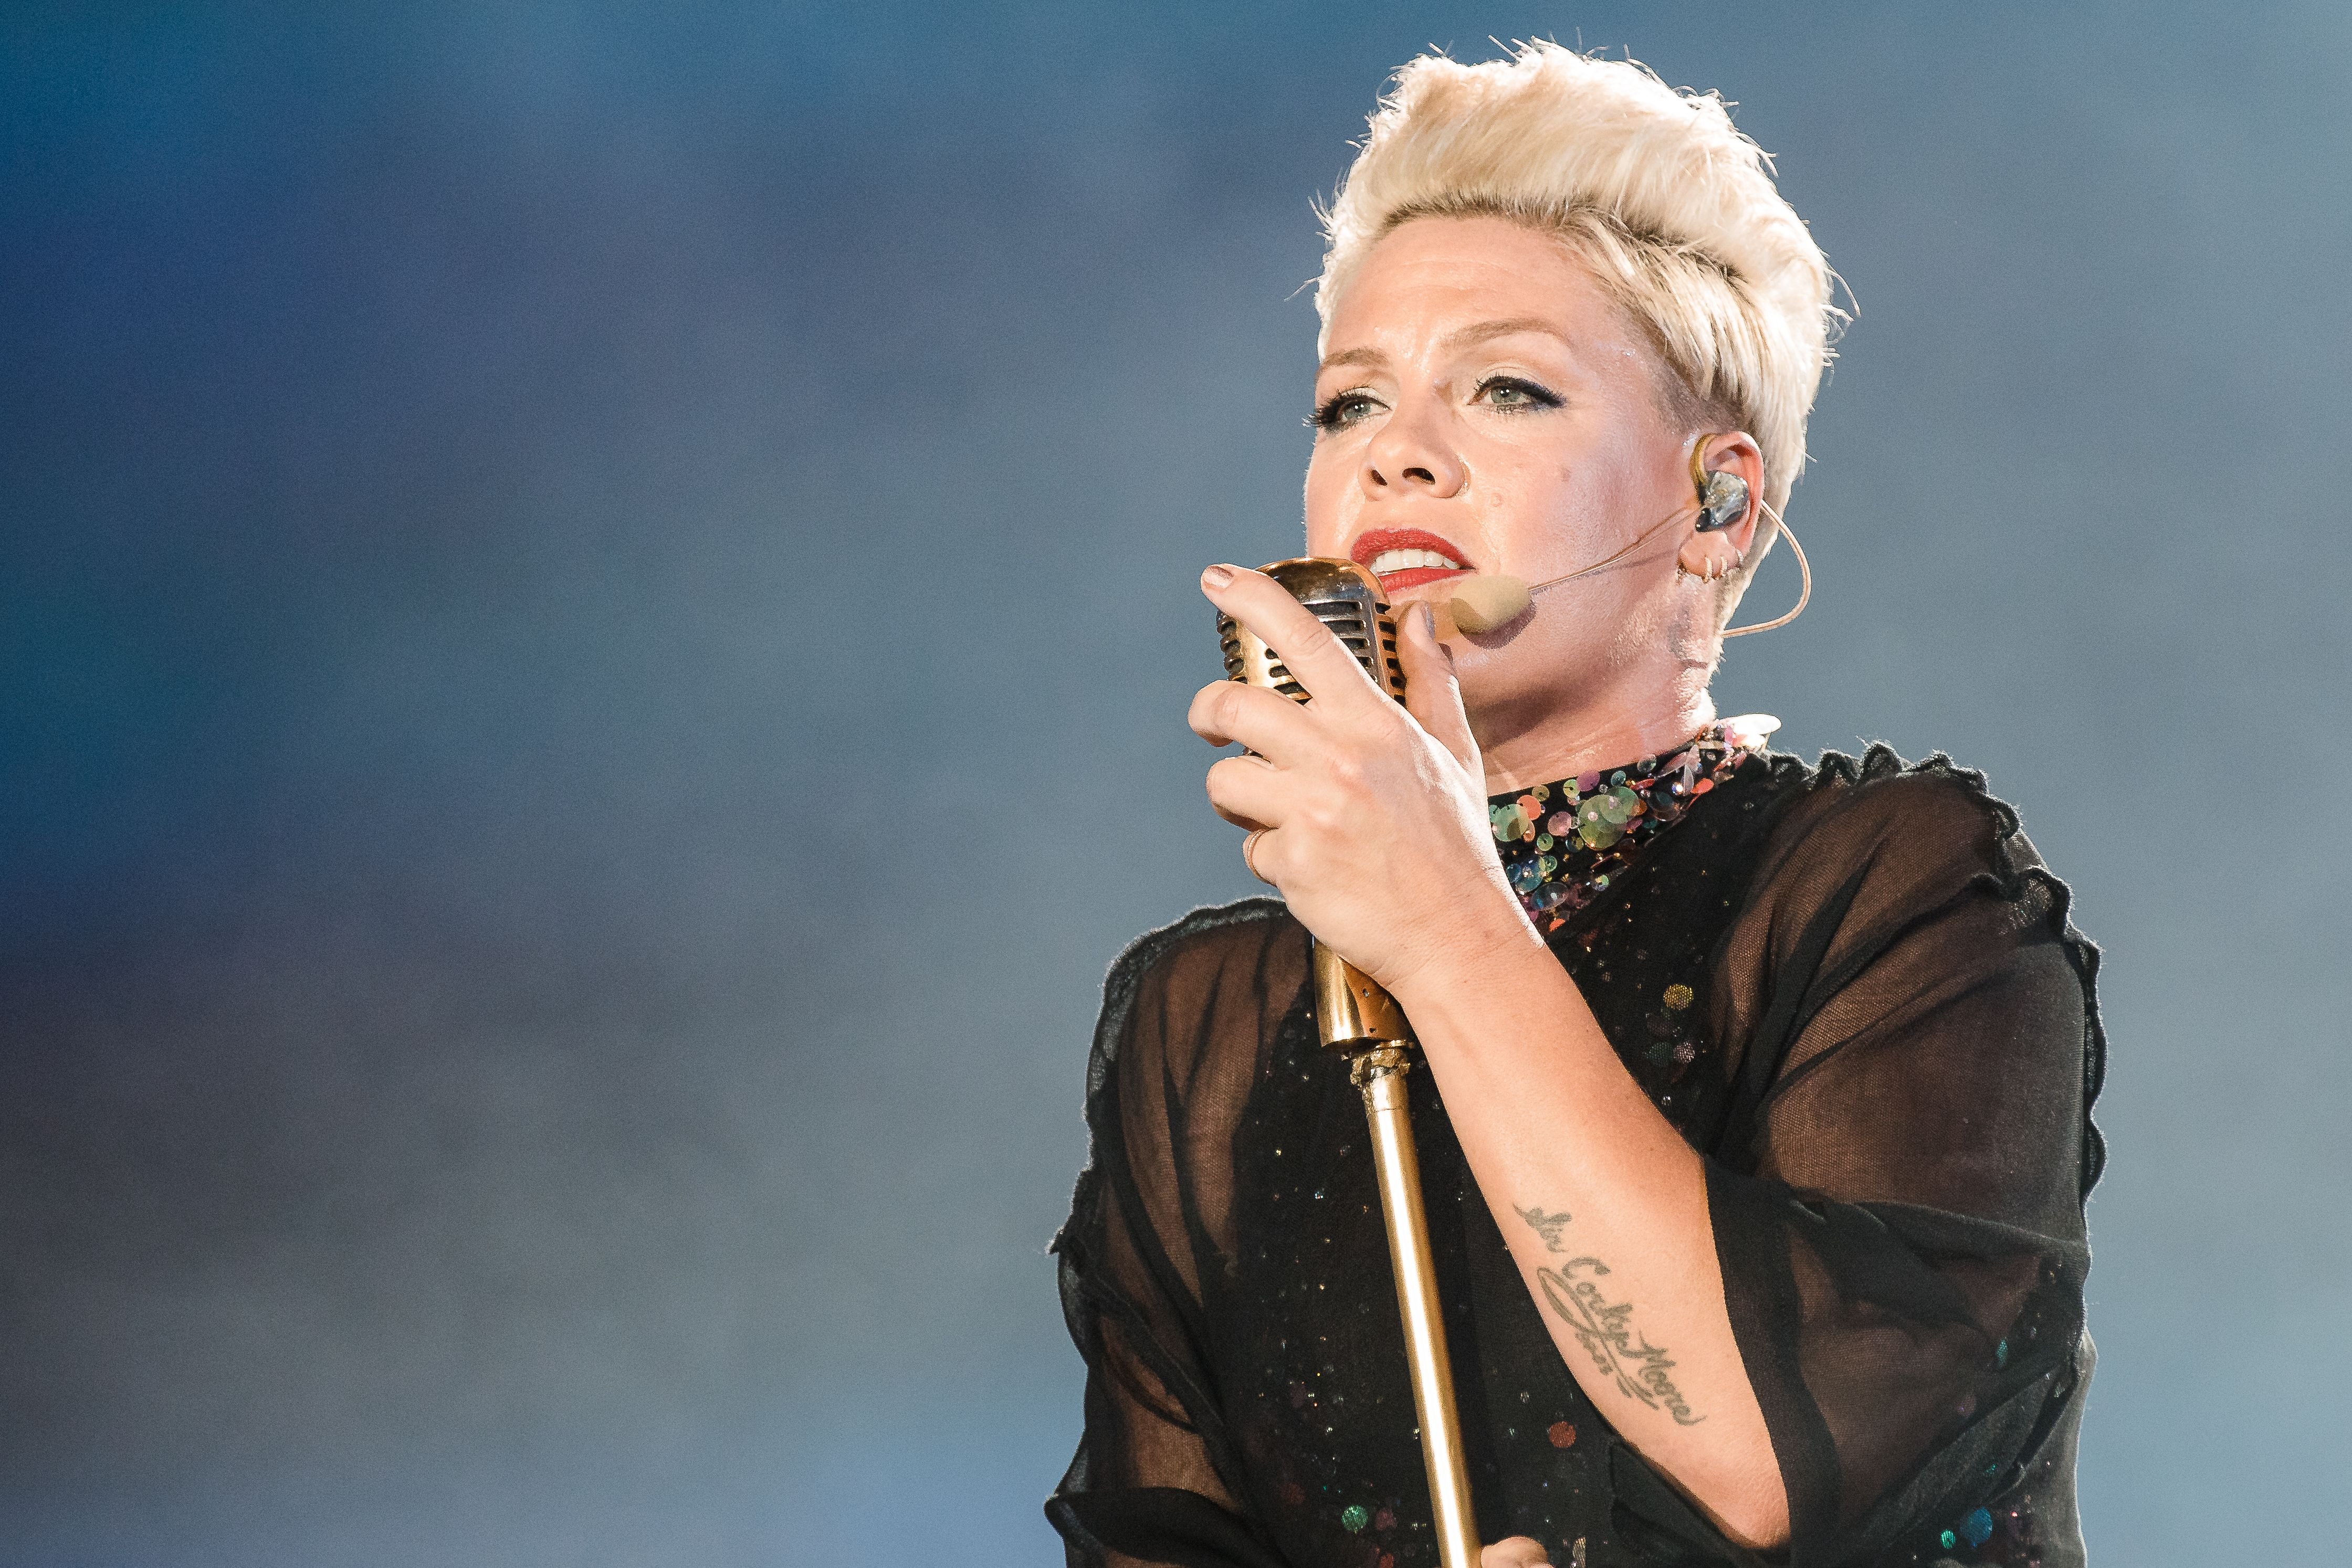 P!nk performs live on stage at day 6 of Rock In Rio Music Festival at Cidade do Rock on October 5, 2019 | Photo: Getty Images